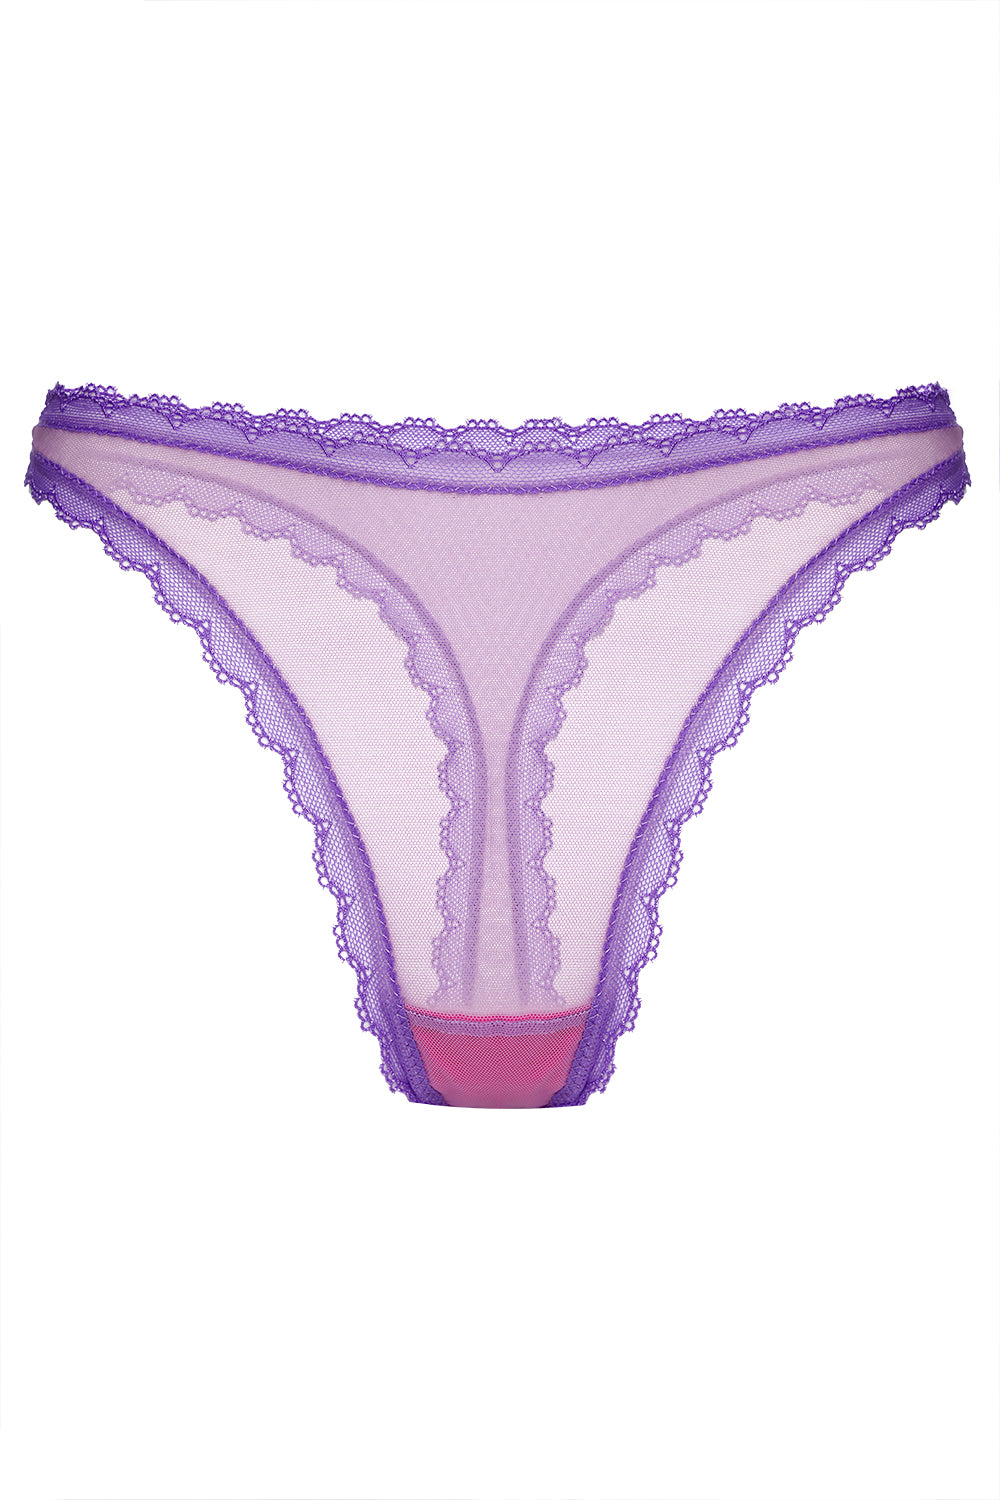 Valerie Violet high waisted thongs